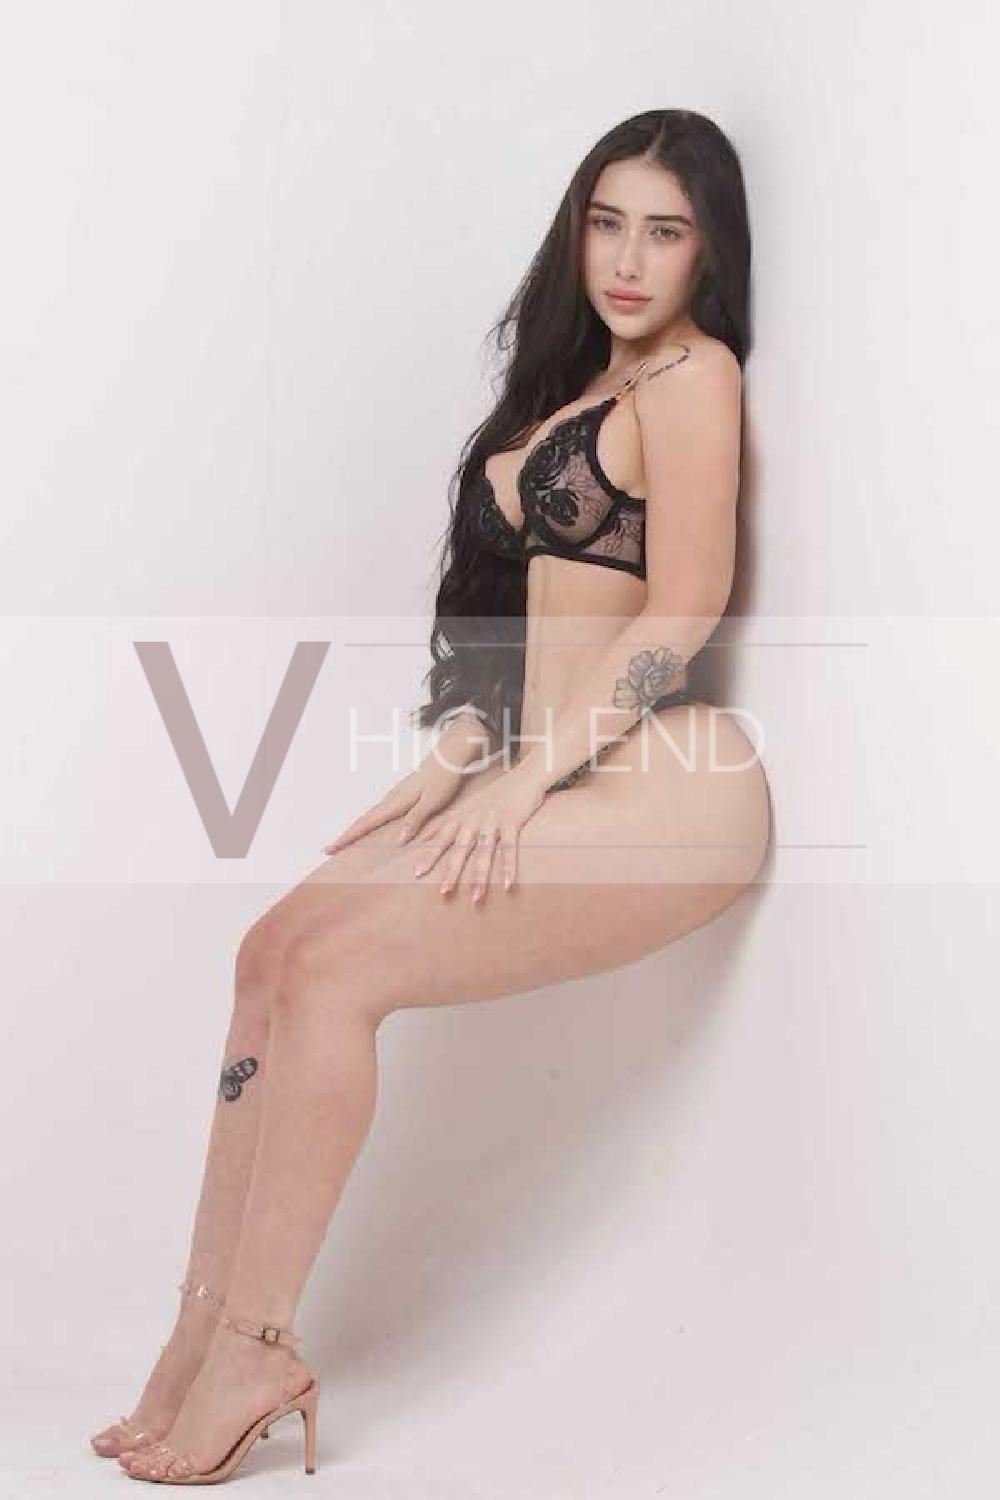 Vip escort Paulina is leaning on a white wall holding legs and wearing black underwear with beige high heels sandals 